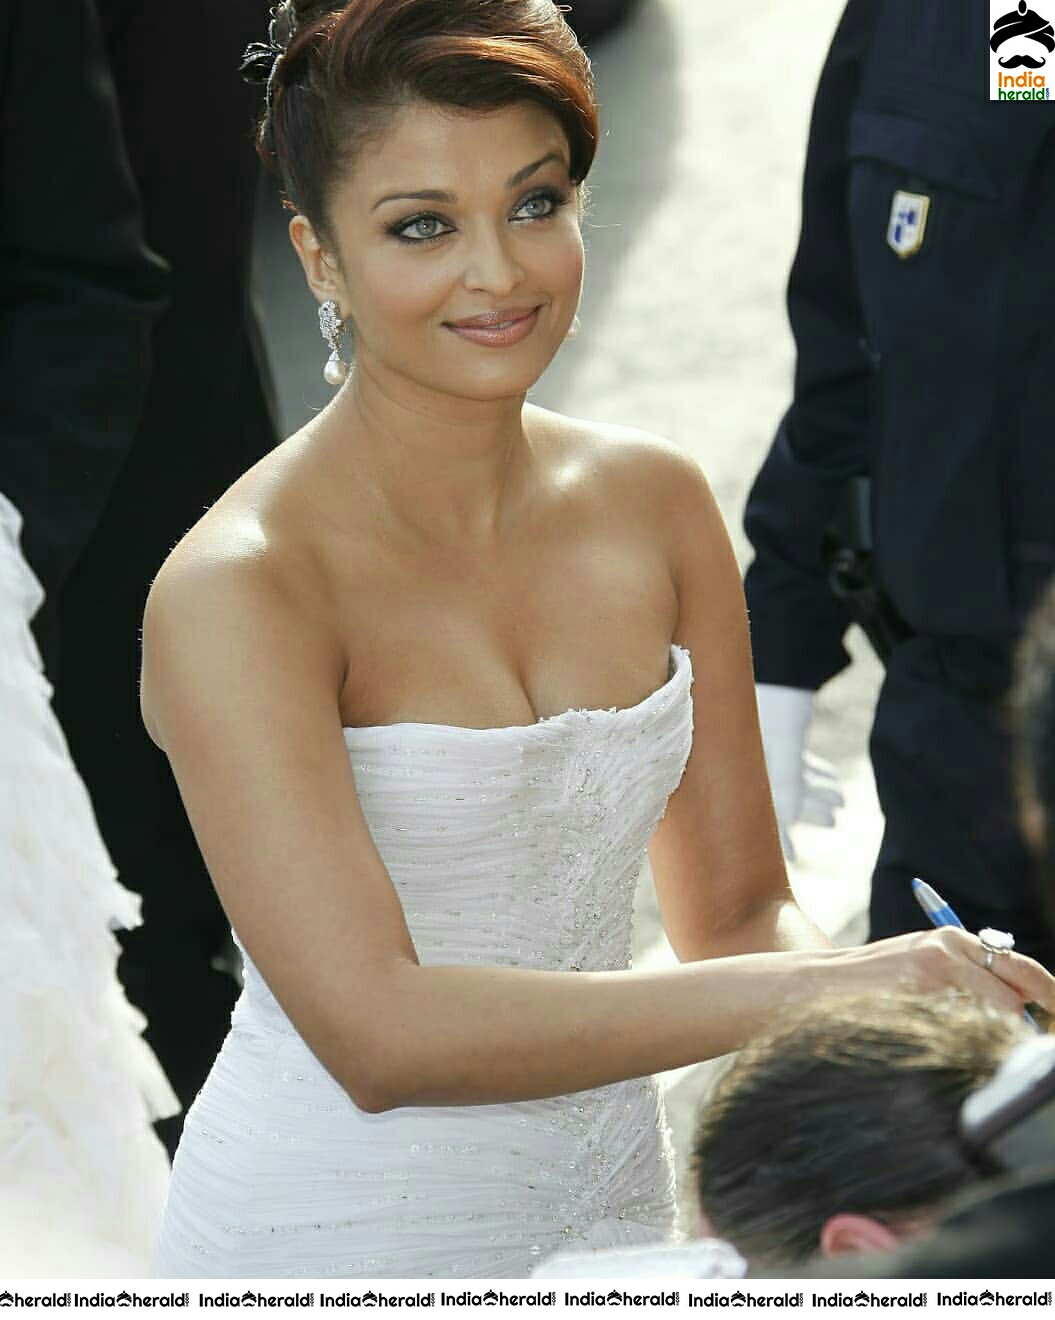 CANNES 2019: AISHWARYA RAI BACHCHAN STUNS AT THE RED CARPET IN WHITE GOWN -  PressReader